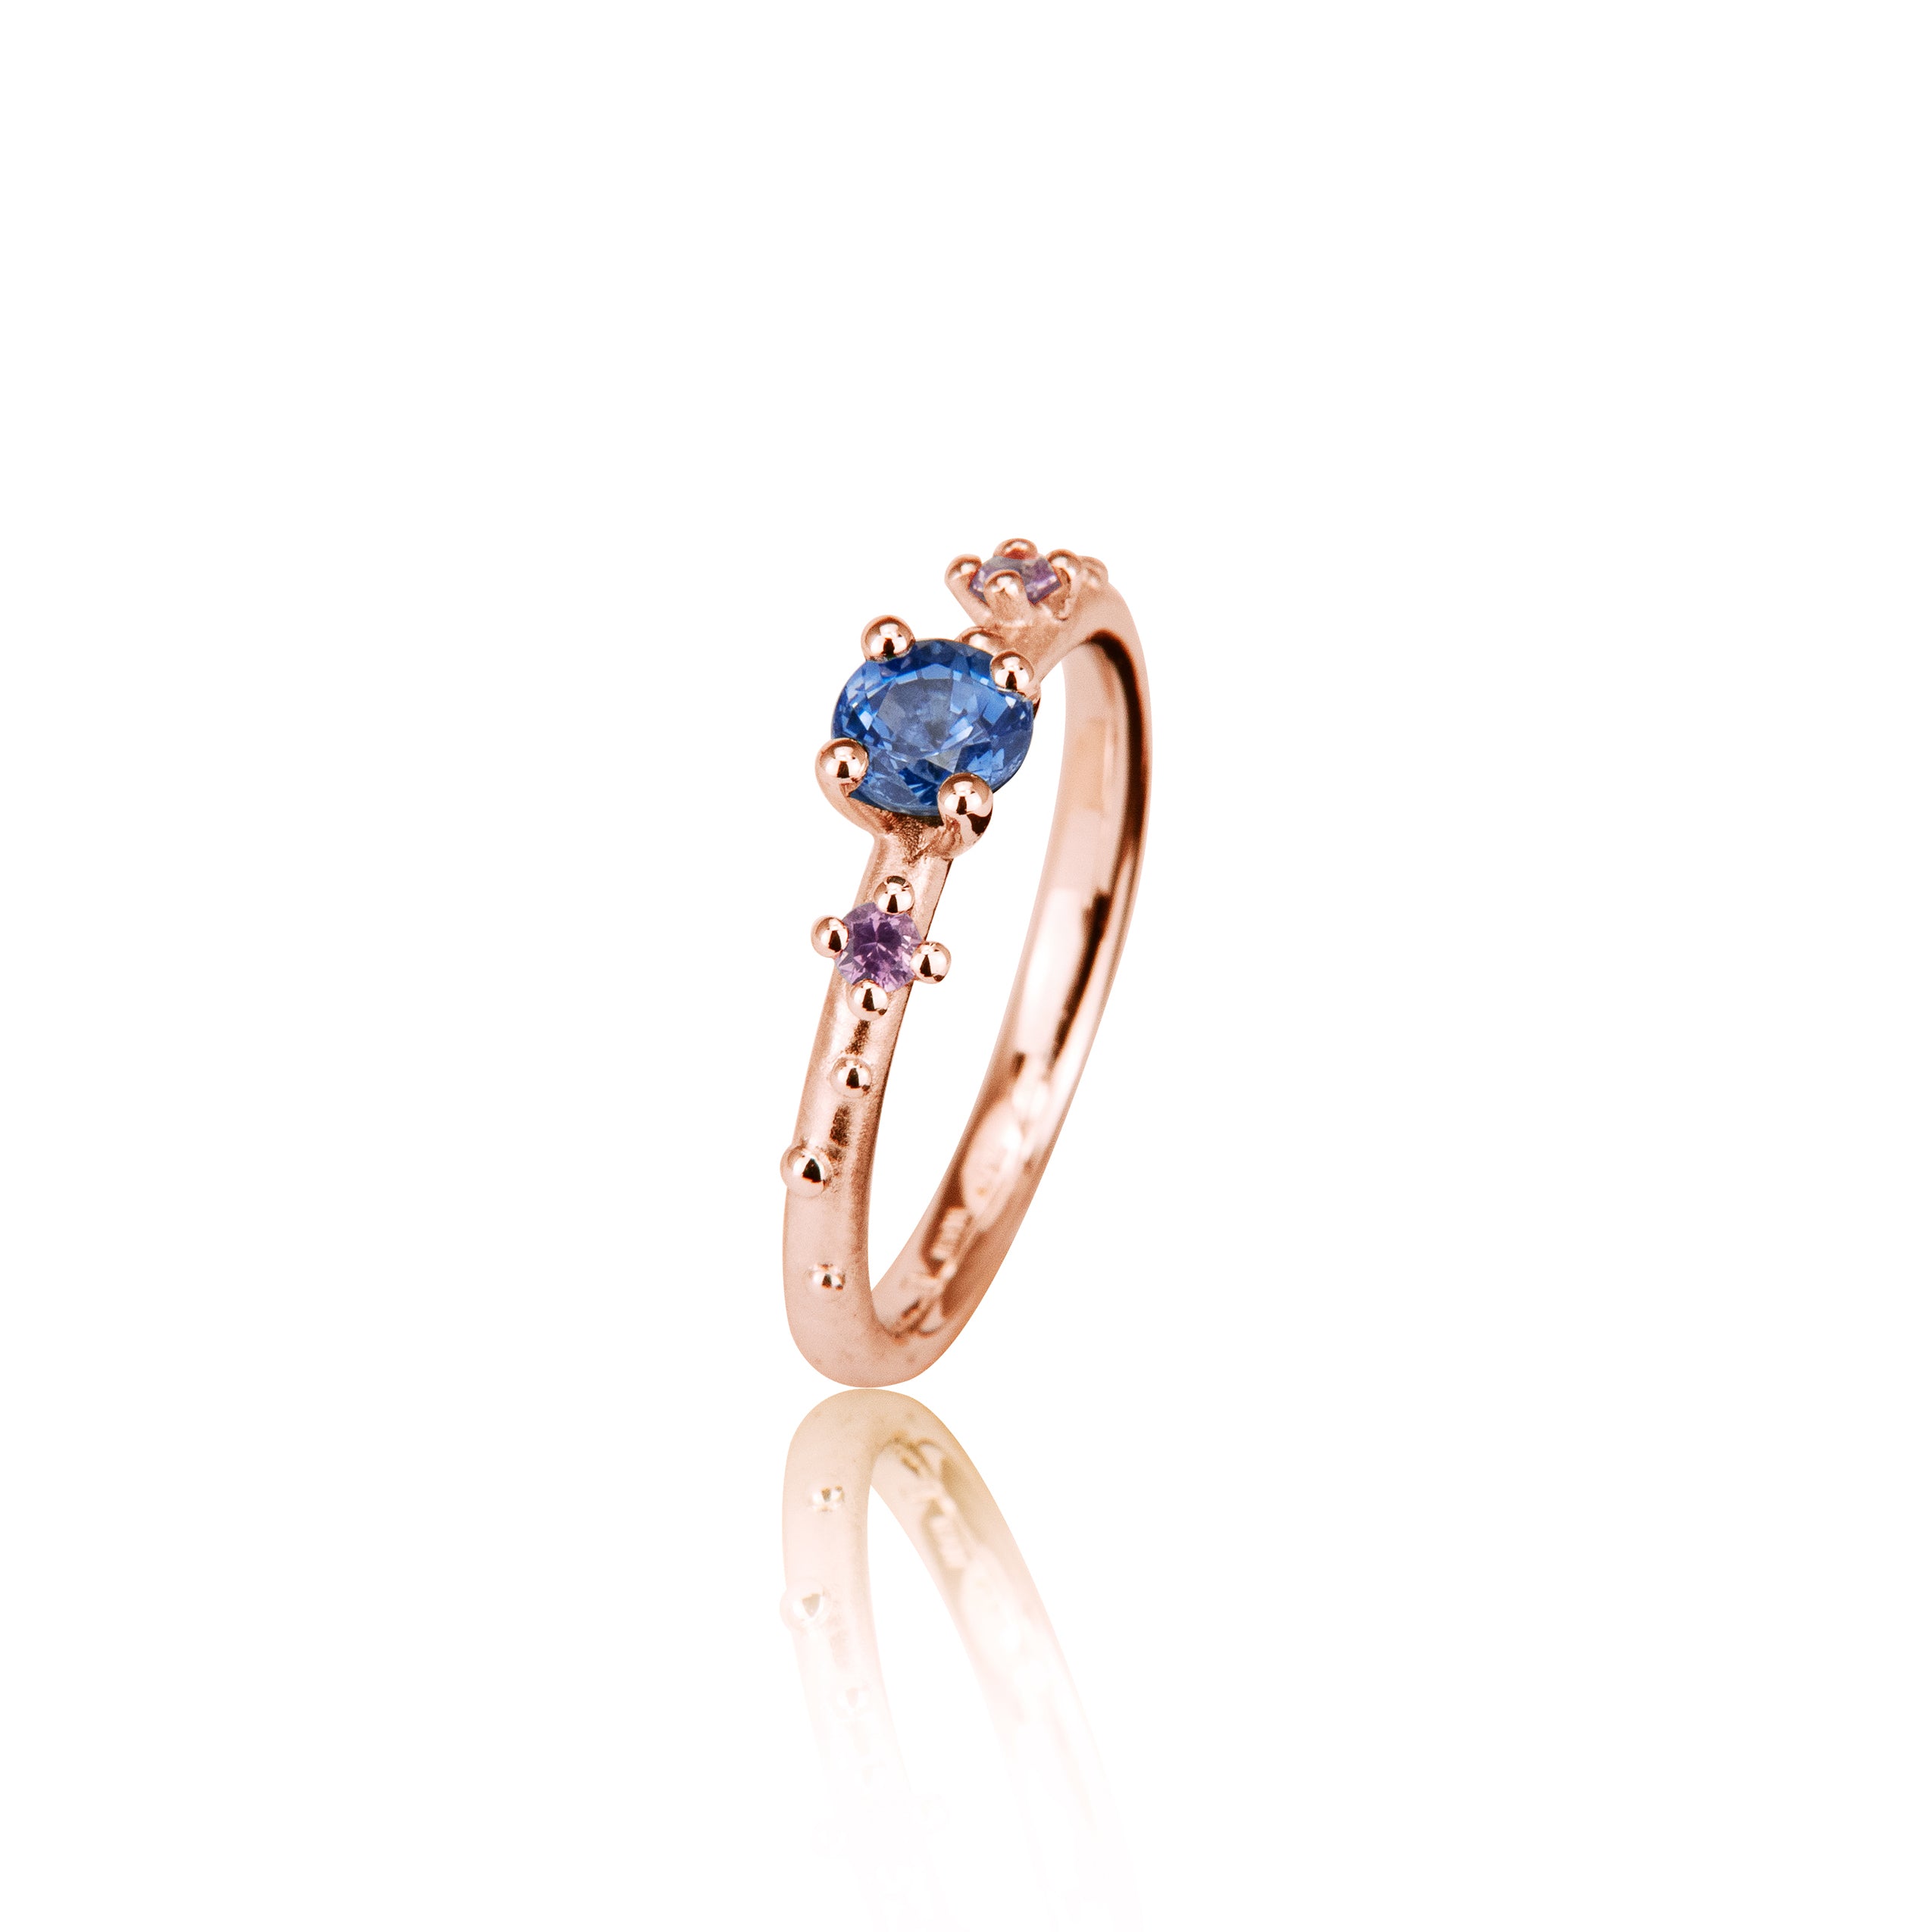 Shine ring "Blue" in gold with sapphires